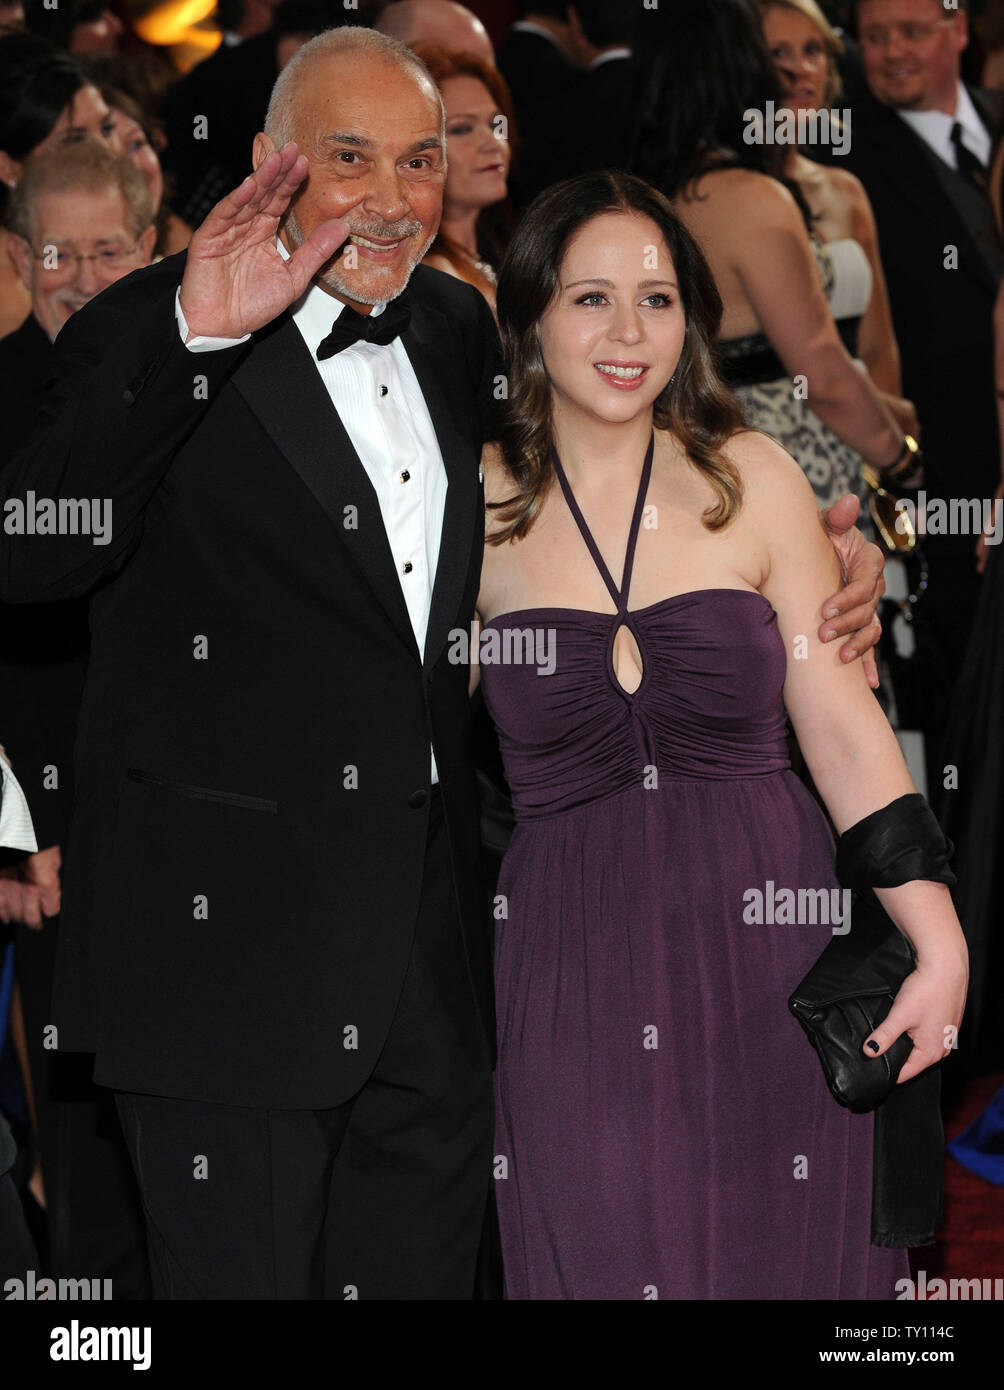 Frank Langella, best actor nominee for 'Frost Nixon,' and his daughter Sarah arrive at the 81st Academy Awards in Hollywood on February 22, 2009.   (UPI Photo/Jim Ruymen) Stock Photo